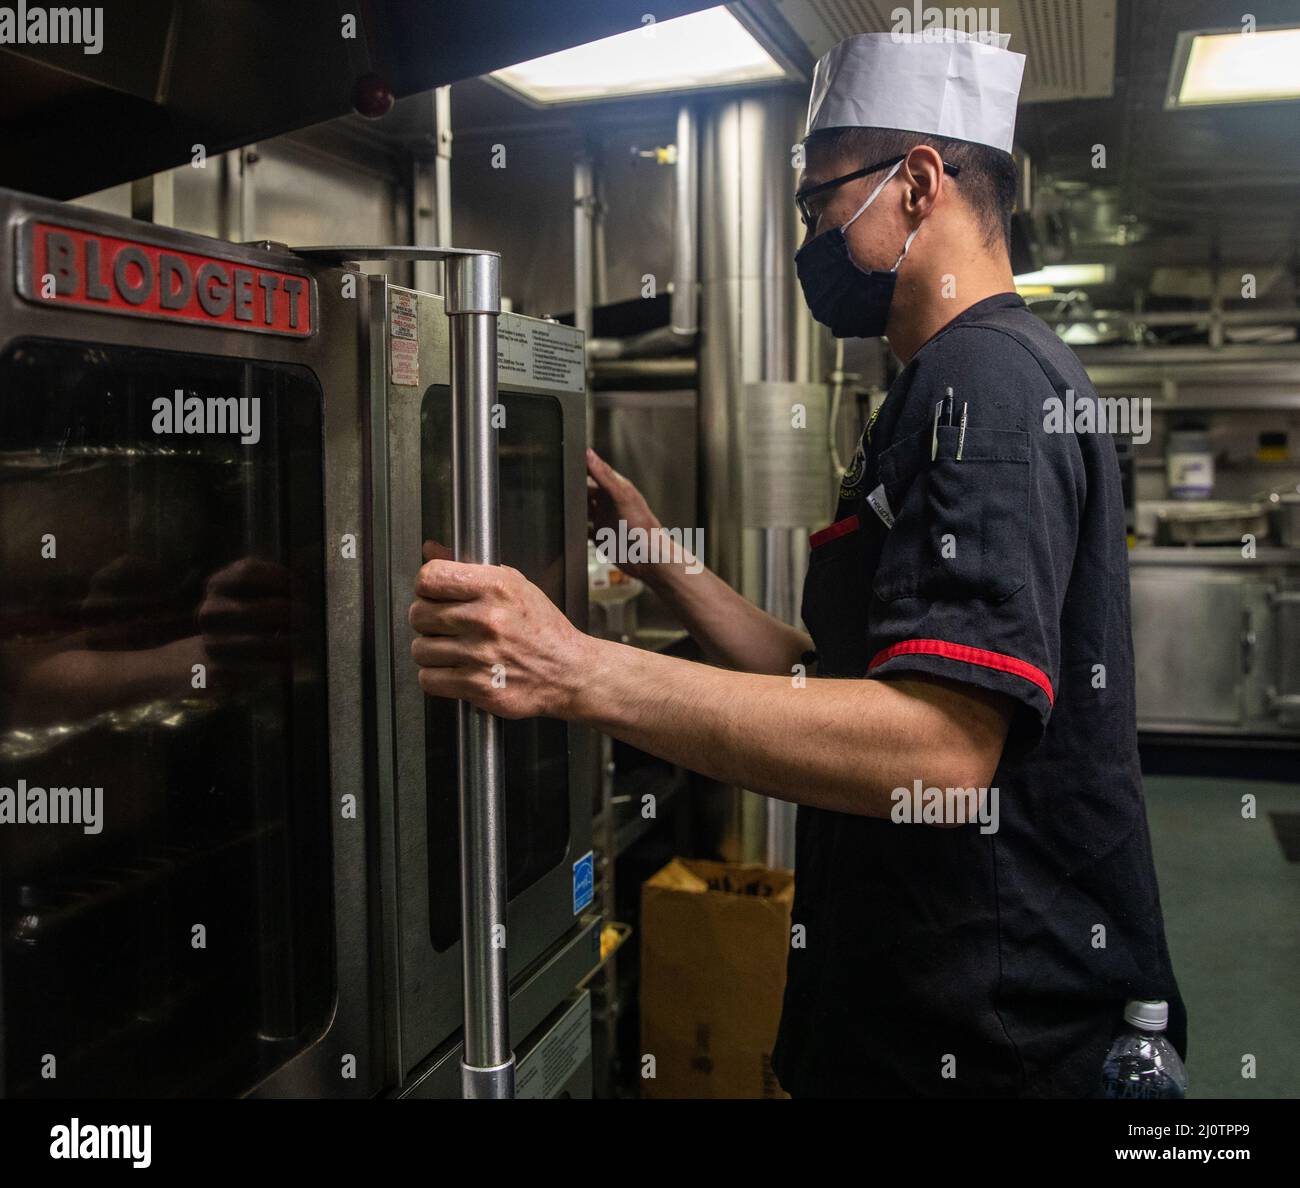 EAST CHINA SEA (Jan. 26, 2022) Culinary Specialist 3rd Class Glenmark Gervacio, from Queens, N.Y., places a tray of food in an oven in the galley aboard Arleigh Burke-class guided-missile destroyer USS Ralph Johnson (DDG 114). Ralph Johnson is assigned to Task Force 71/Destroyer Squadron (DESRON) 15, the Navy’s largest forward-deployed DESRON and the U.S. 7th fleet’s principal surface force. (U.S. Navy photo by Mass Communication Specialist 2nd Class Samantha Oblander) Stock Photo